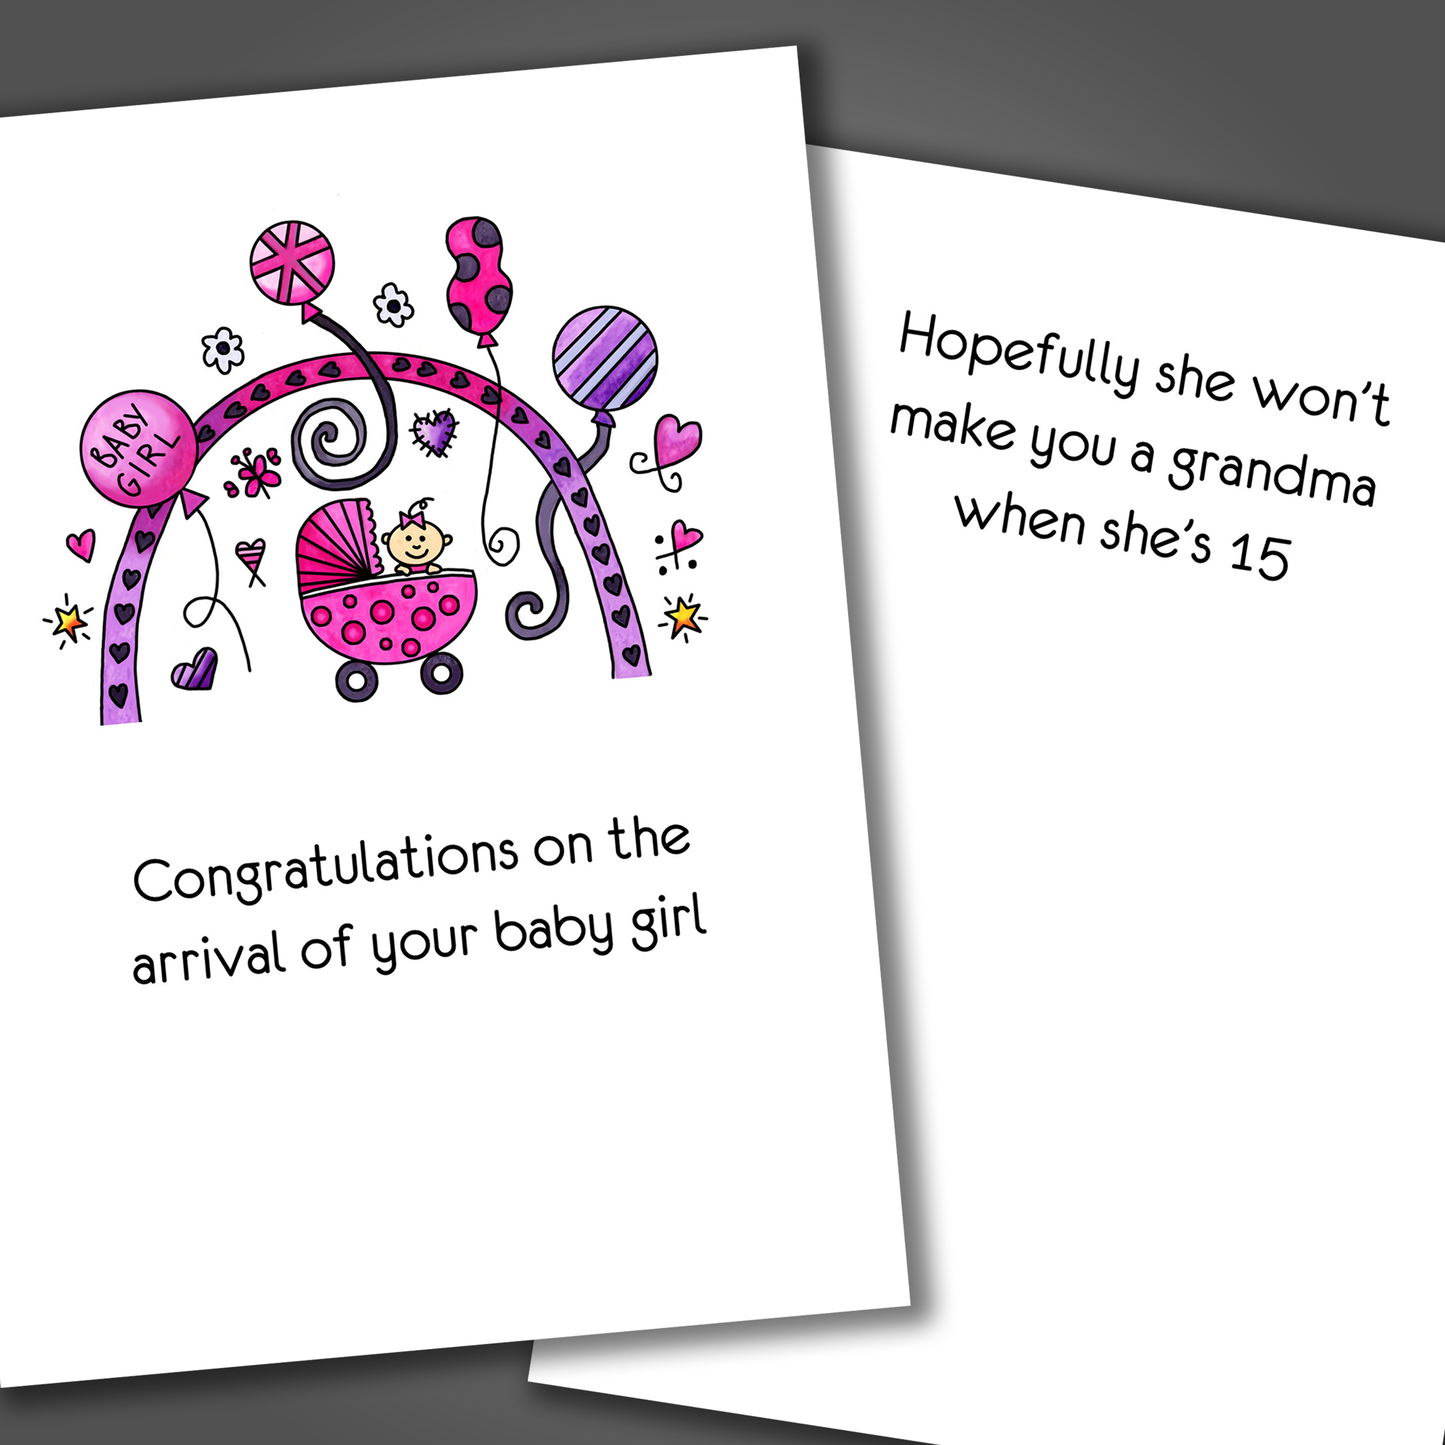 Funny new baby or adoption card with pink and purple baby stroller on front of card. Inside is a funny joke that says hopefully she won't make you a grandma when she's 15.